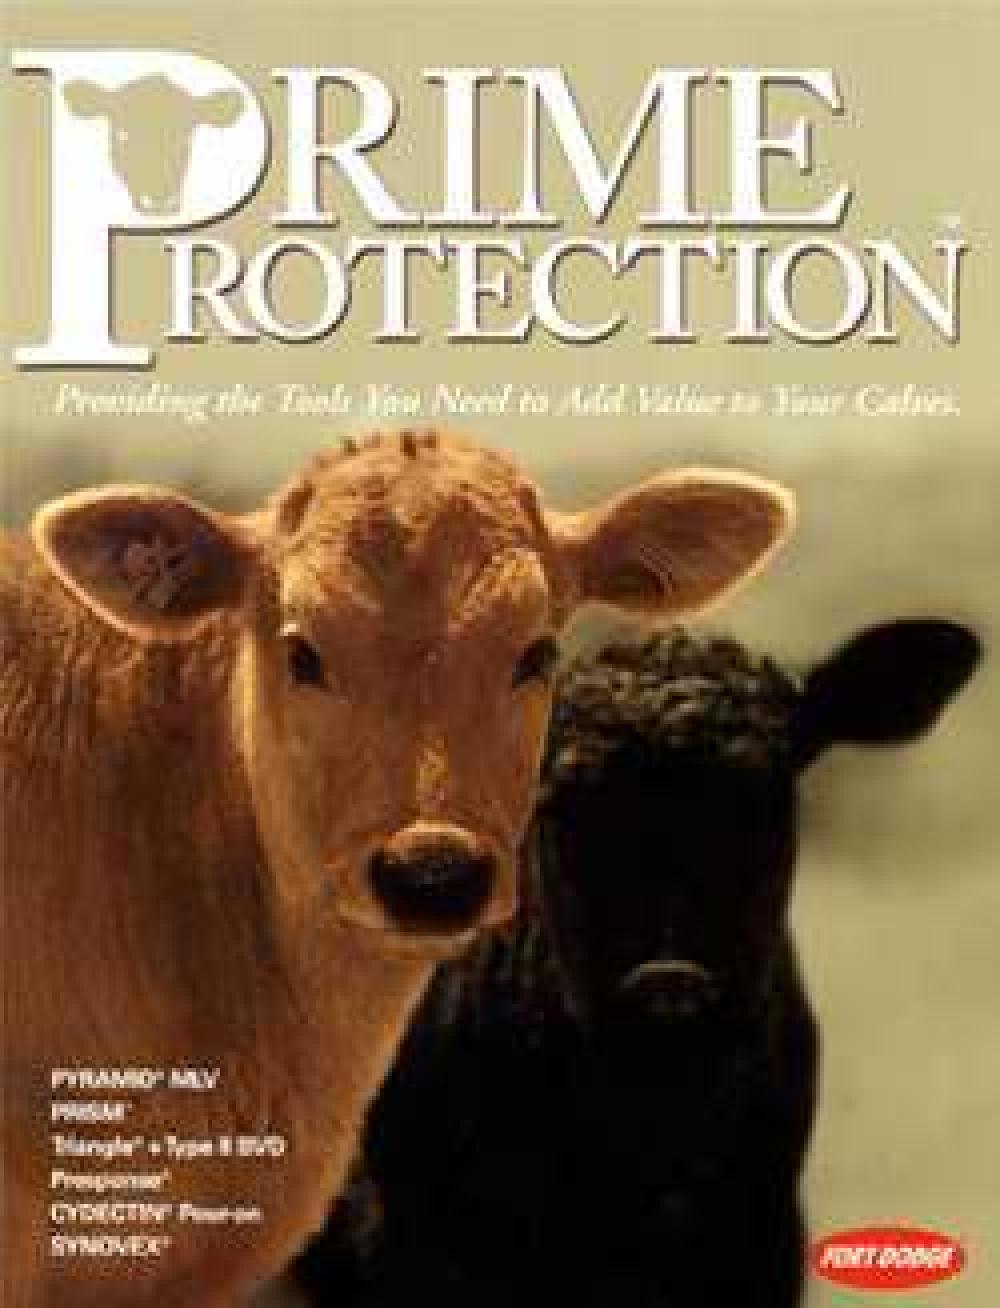  PRIME PROTECTION